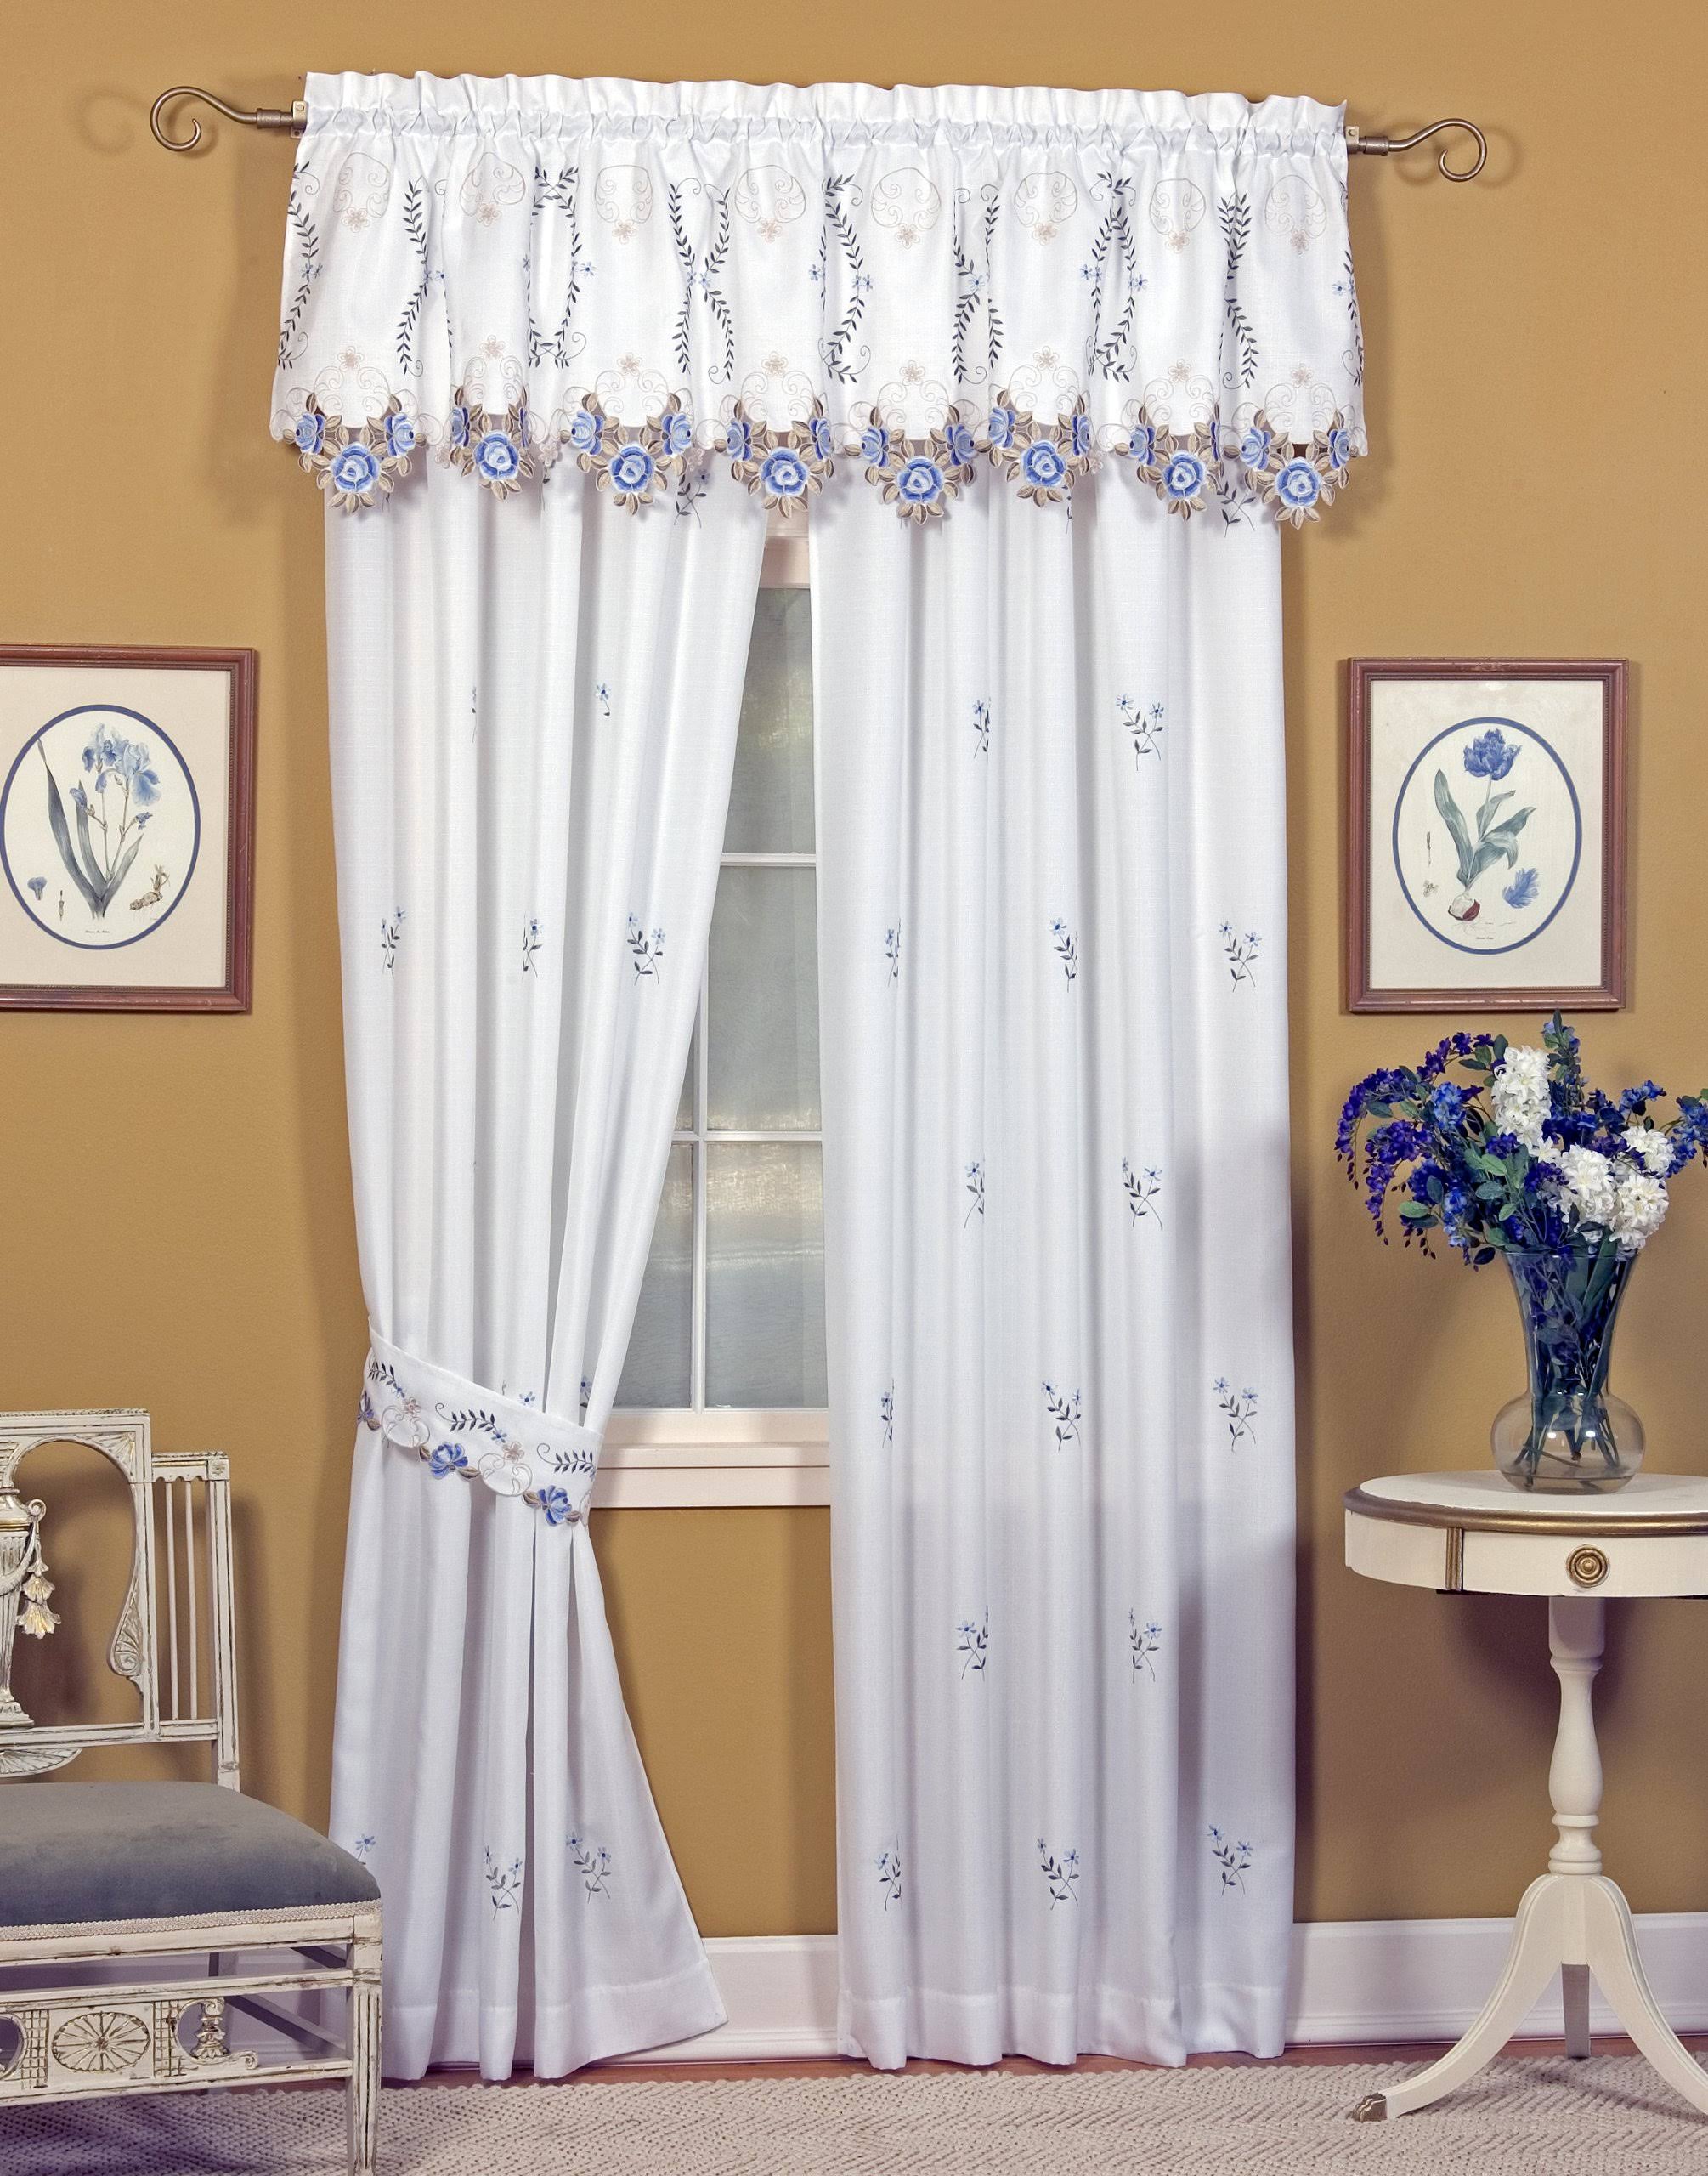 Today's Curtain Verona Reverse Embroidery Window Panel Pair and Tiebacks, 84-Inch, White/Blue